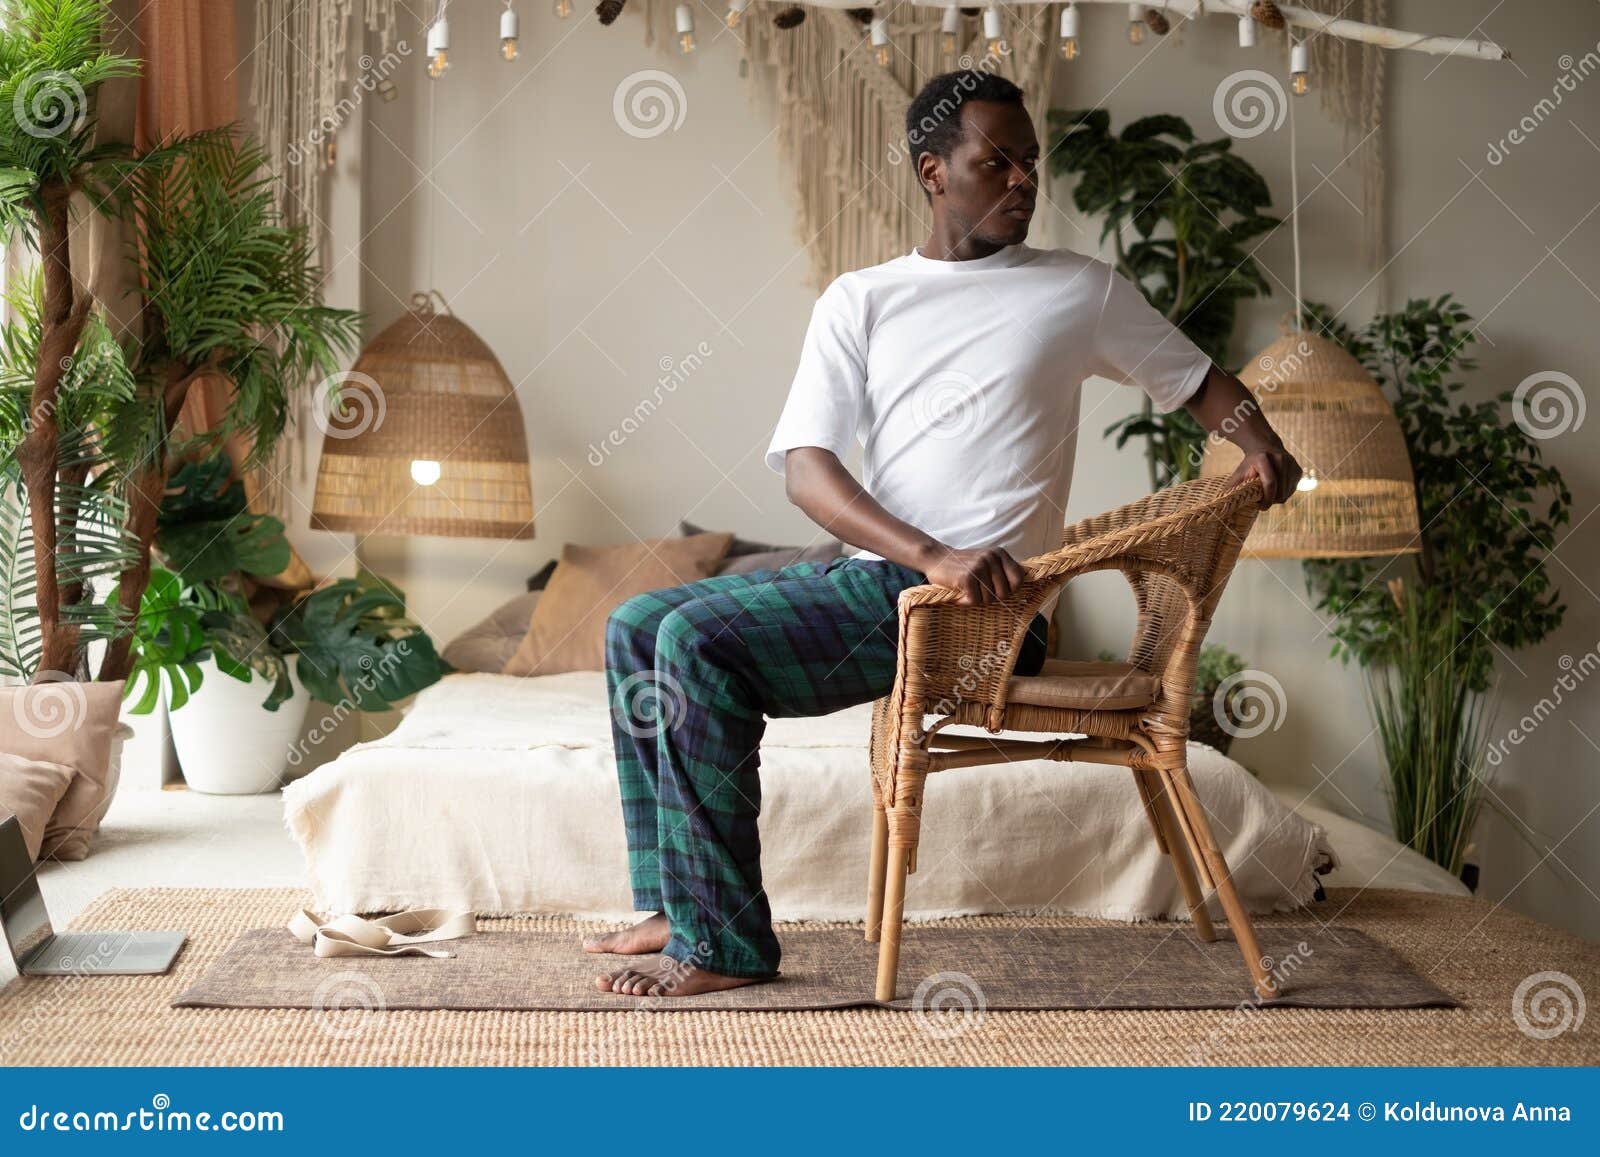 Man in sitting pose on chair Royalty Free Vector Image